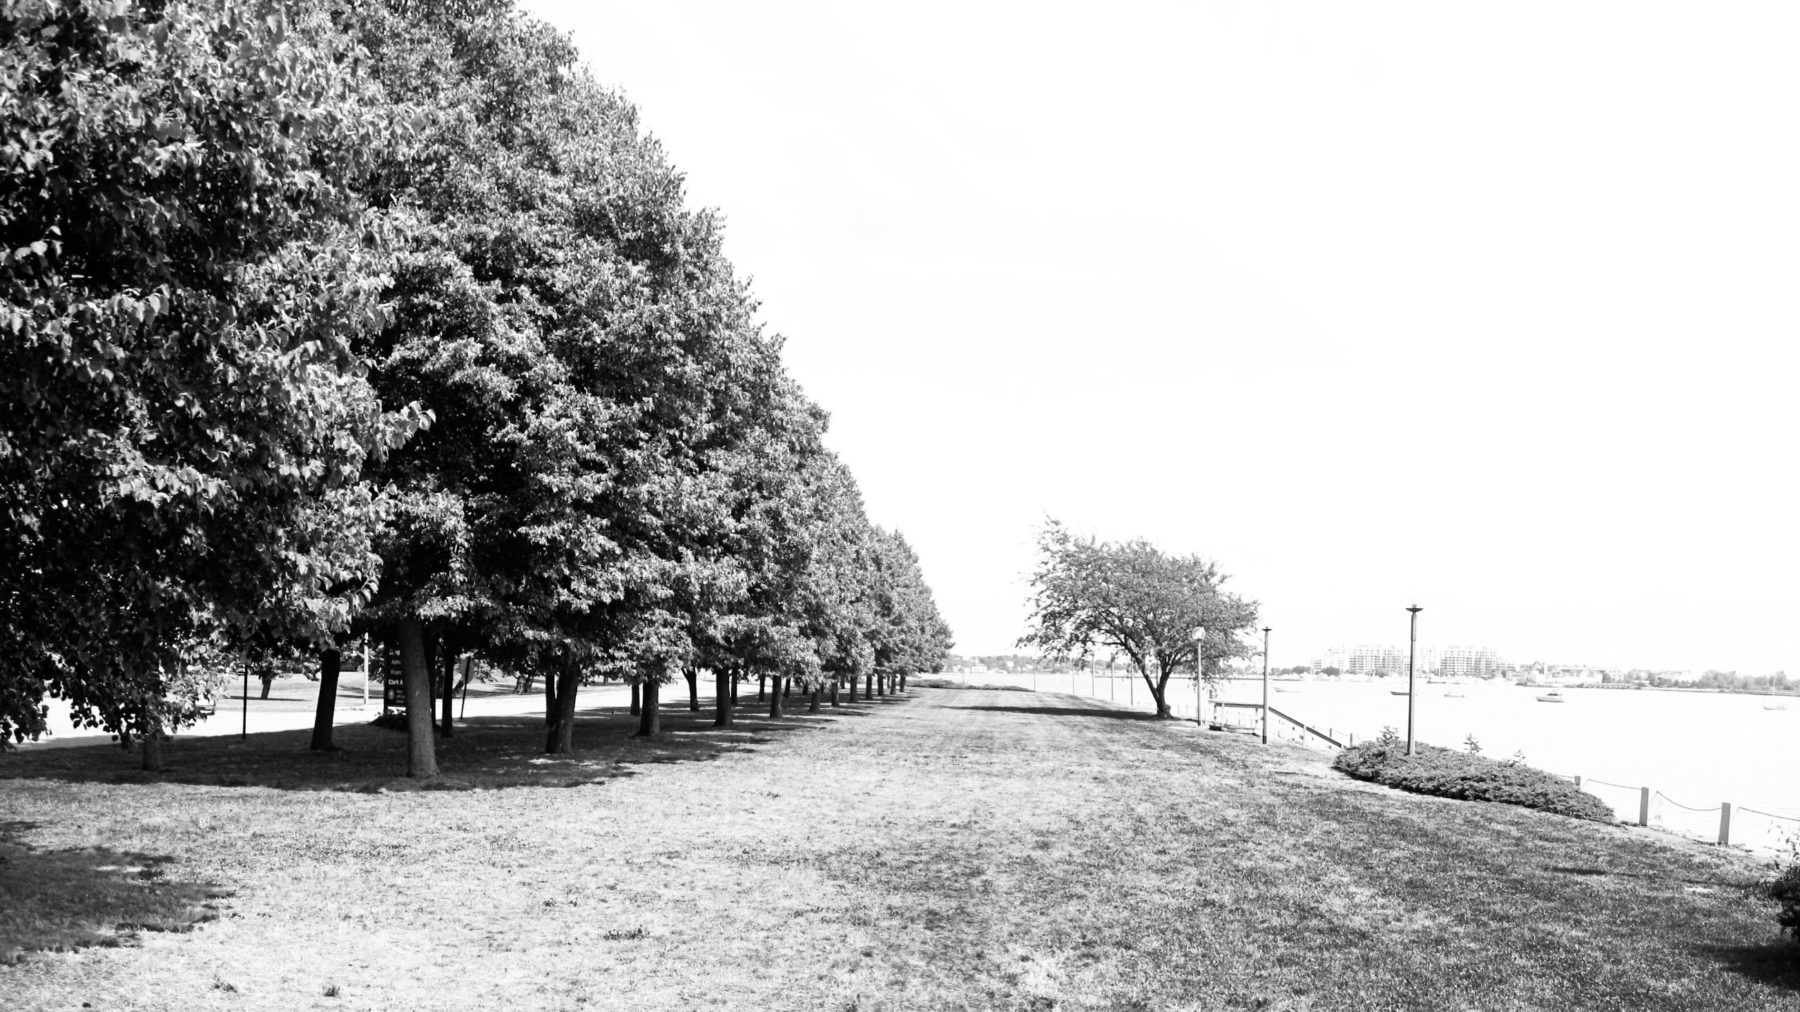 Black and white photos of tree-lined coastline with no development